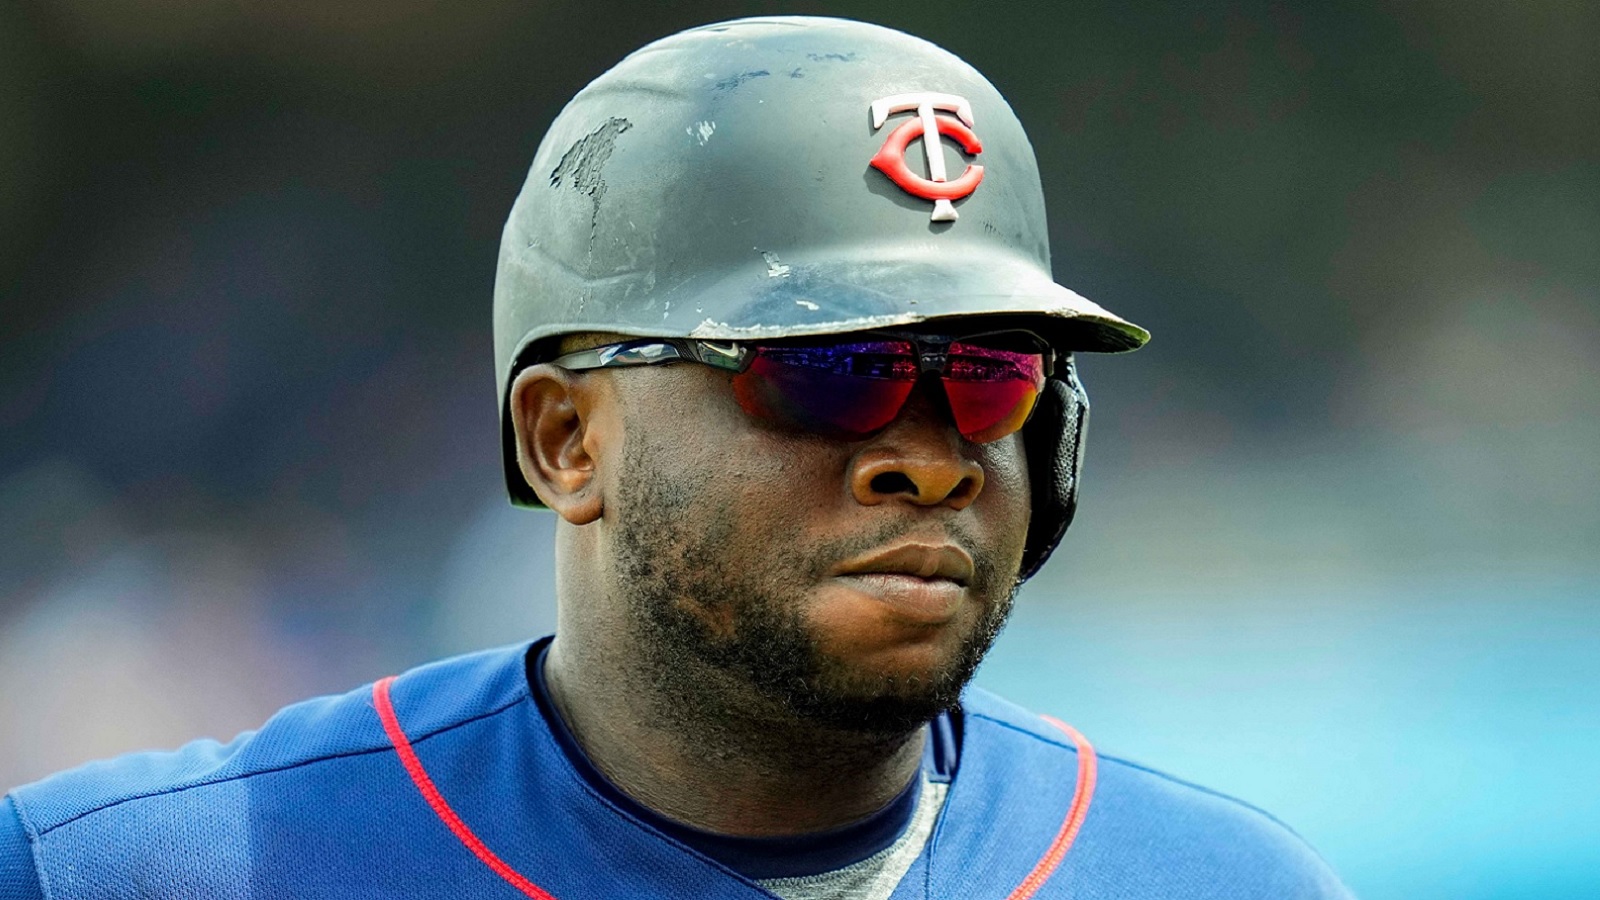 Cleveland announcer rips Miguel Sano for being 'fat